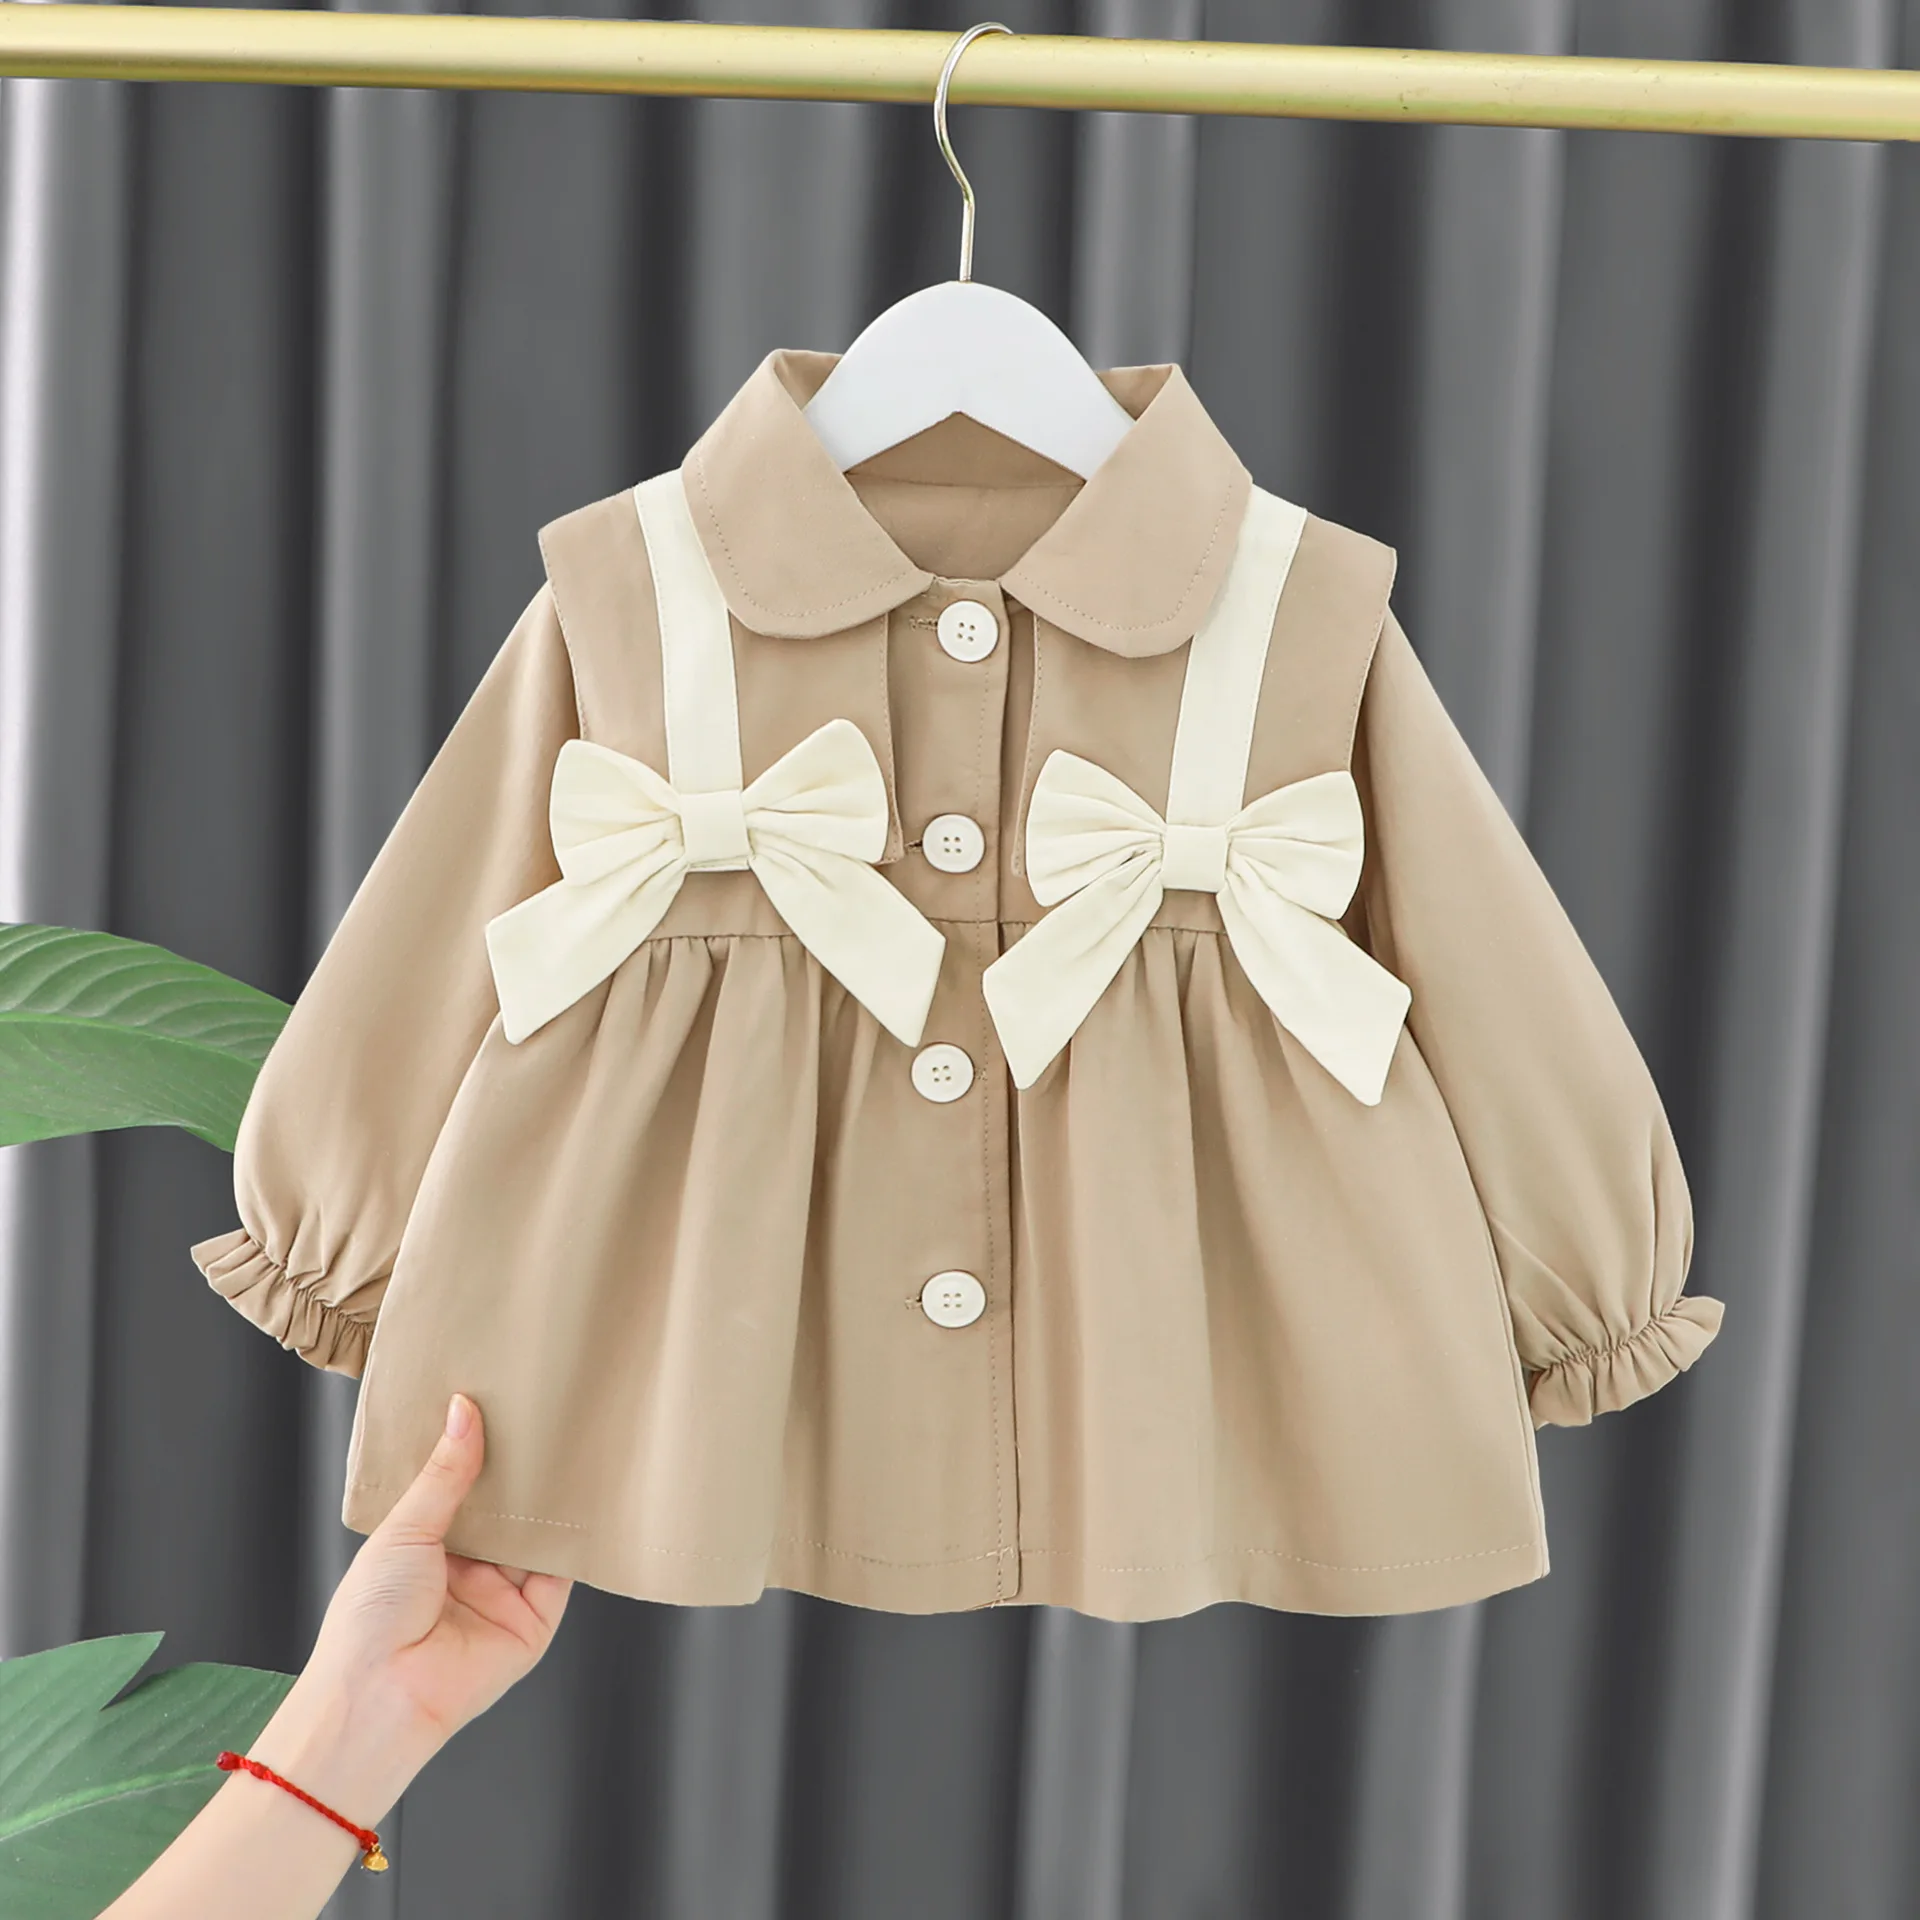 Купи LZH 2022 Autumn New Trench Coat For Girls Outerwear Fashion Bow Windbreaker Children's Clothes For Baby Girl Jackets 1-5 Years за 626 рублей в магазине AliExpress